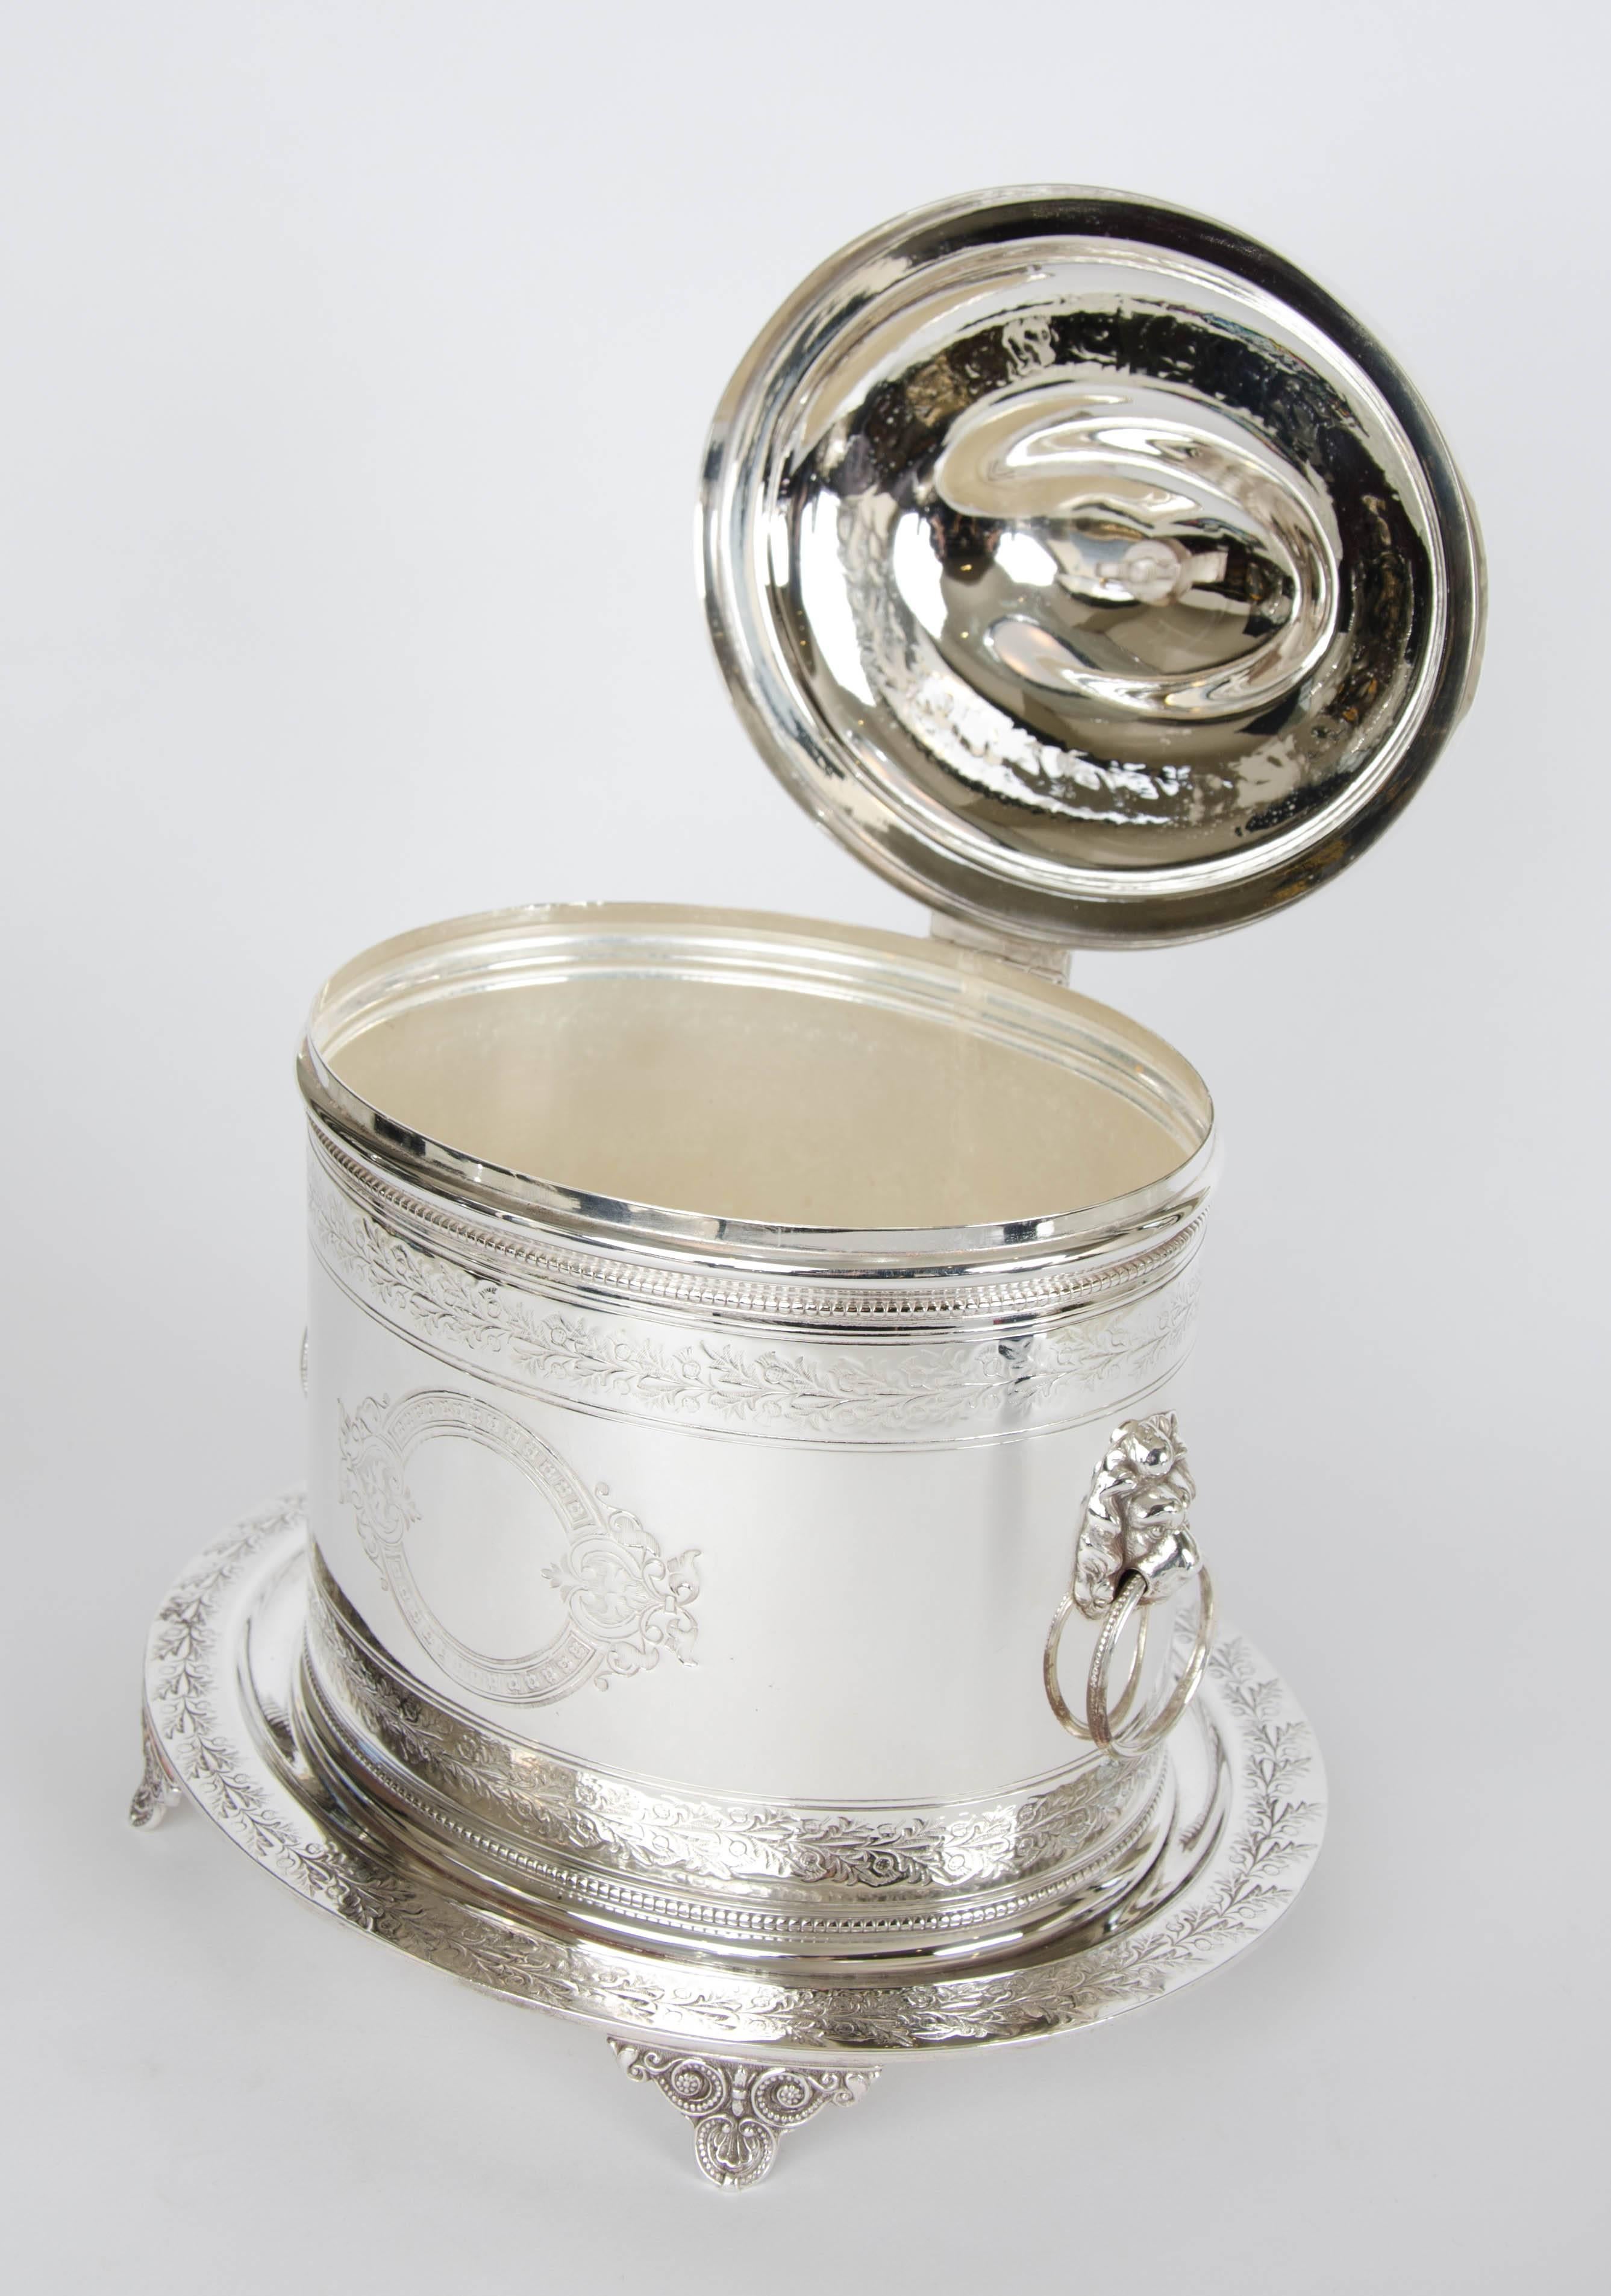 A beautiful adorned Silver plate biscuit box, Circa 1880. 
Great for storing biscuits, candies or other treats. 
Will look great on a sideboard or as a stunning centrepiece.

Please contact us for shipping prices.